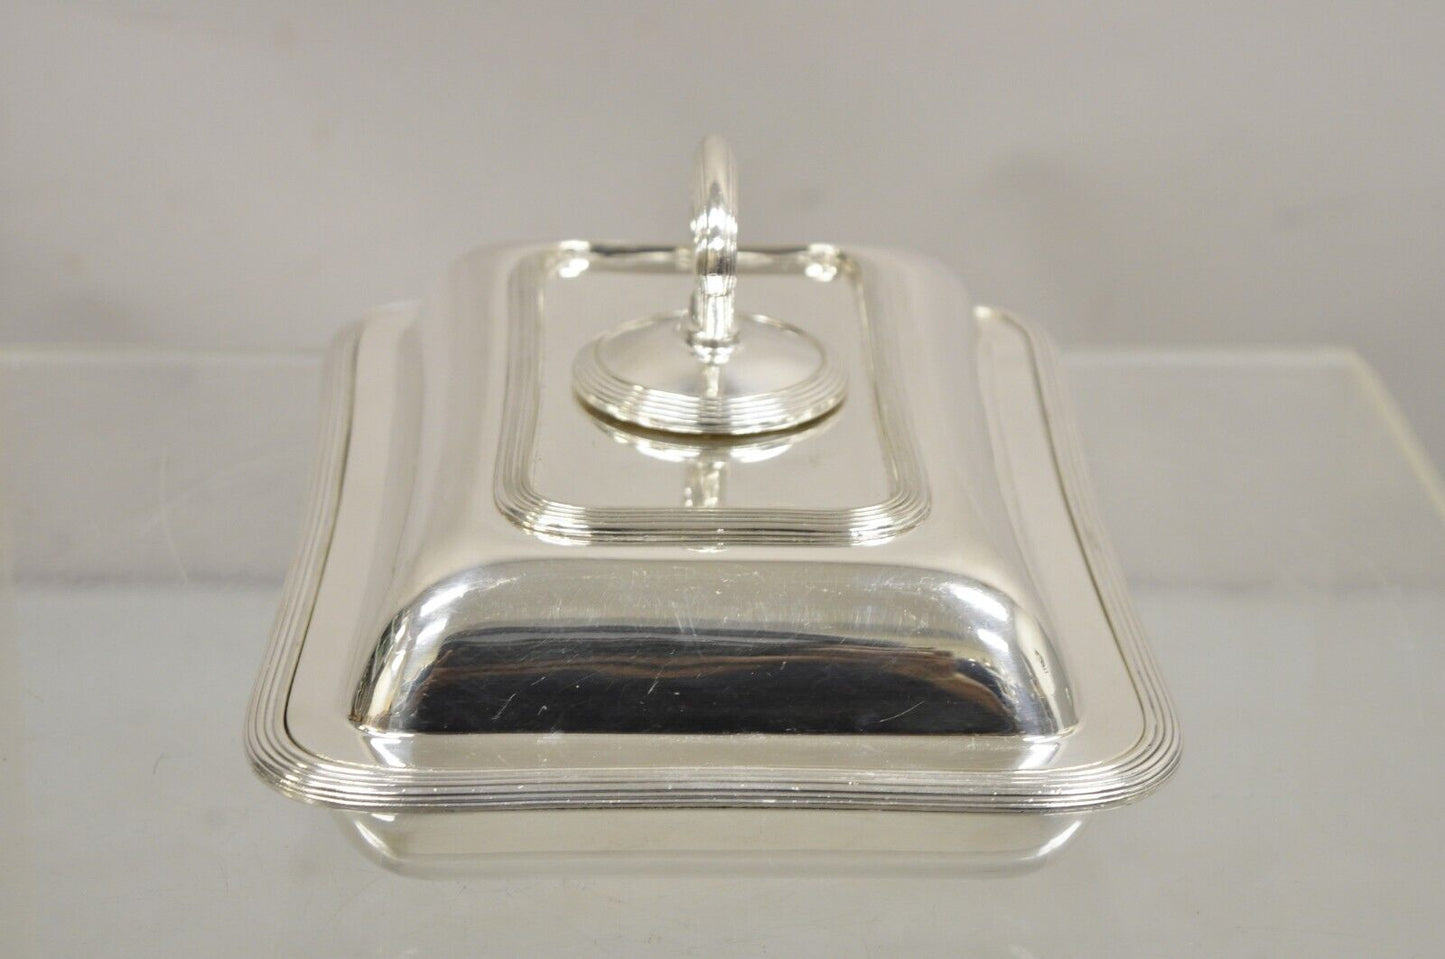 Vintage Goldsmiths & Silversmiths Company Victorian Silver Plated Covered Dish